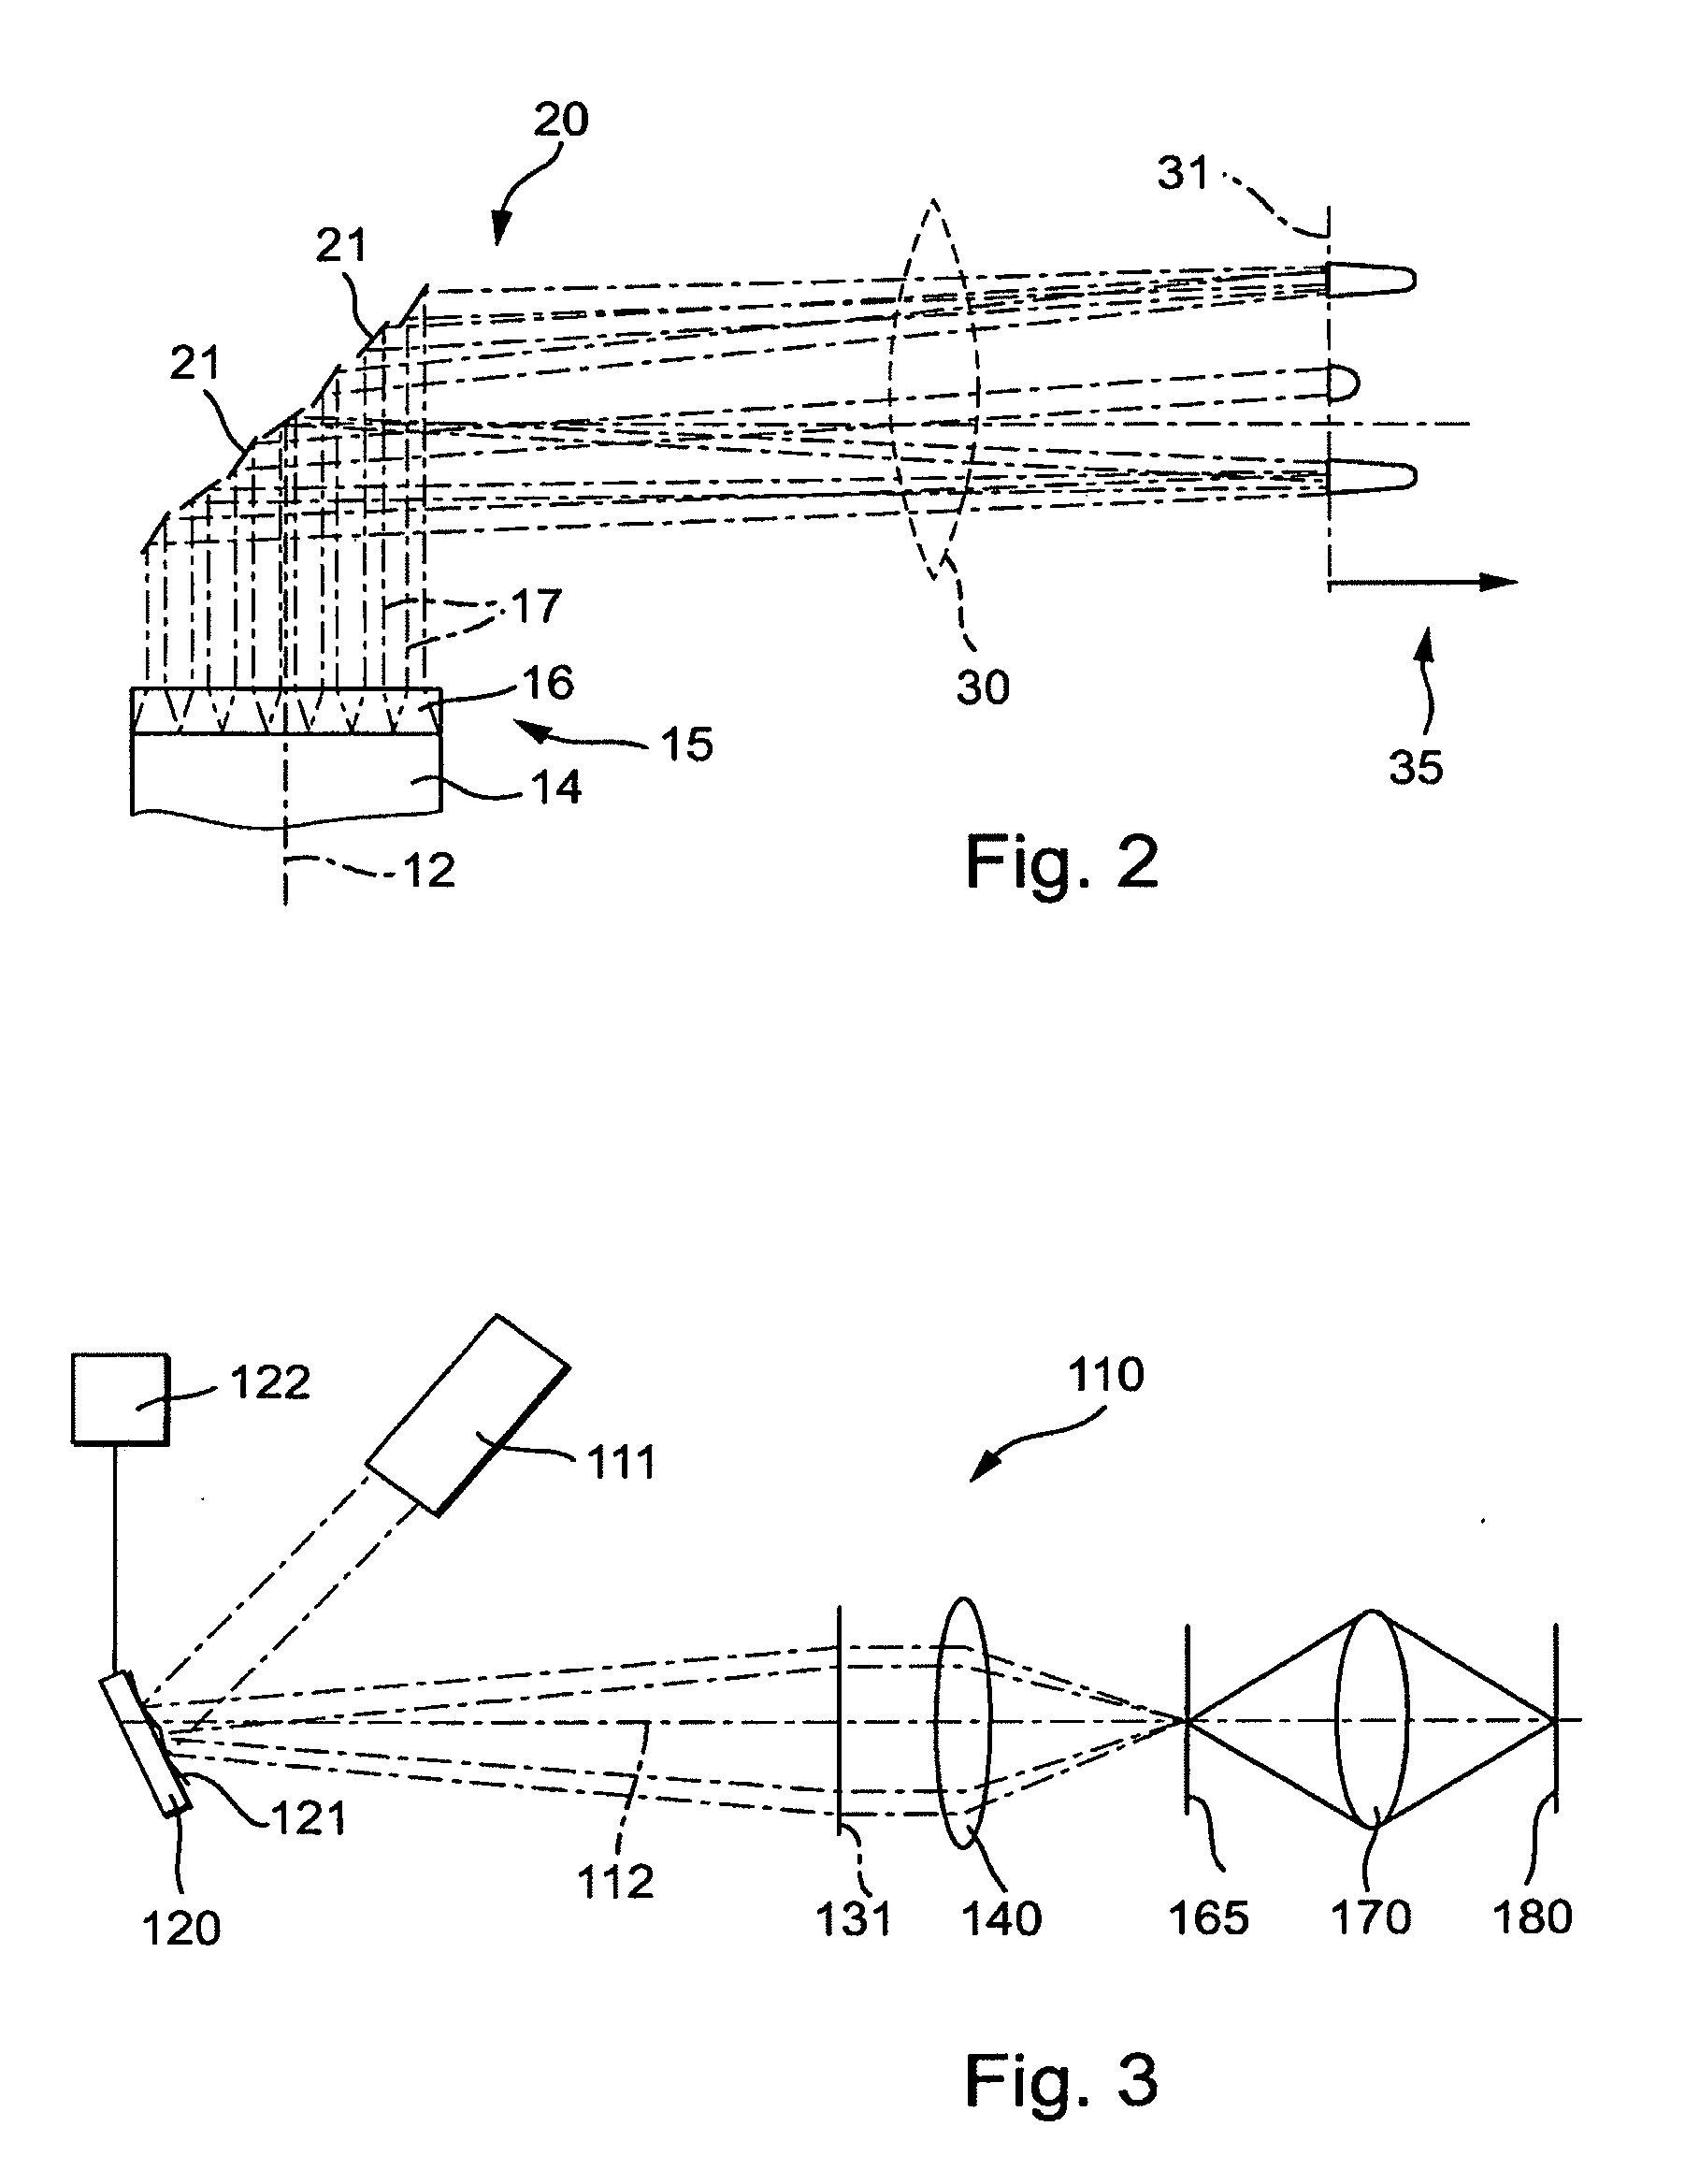 Illumination system for a microlithography projection exposure installation